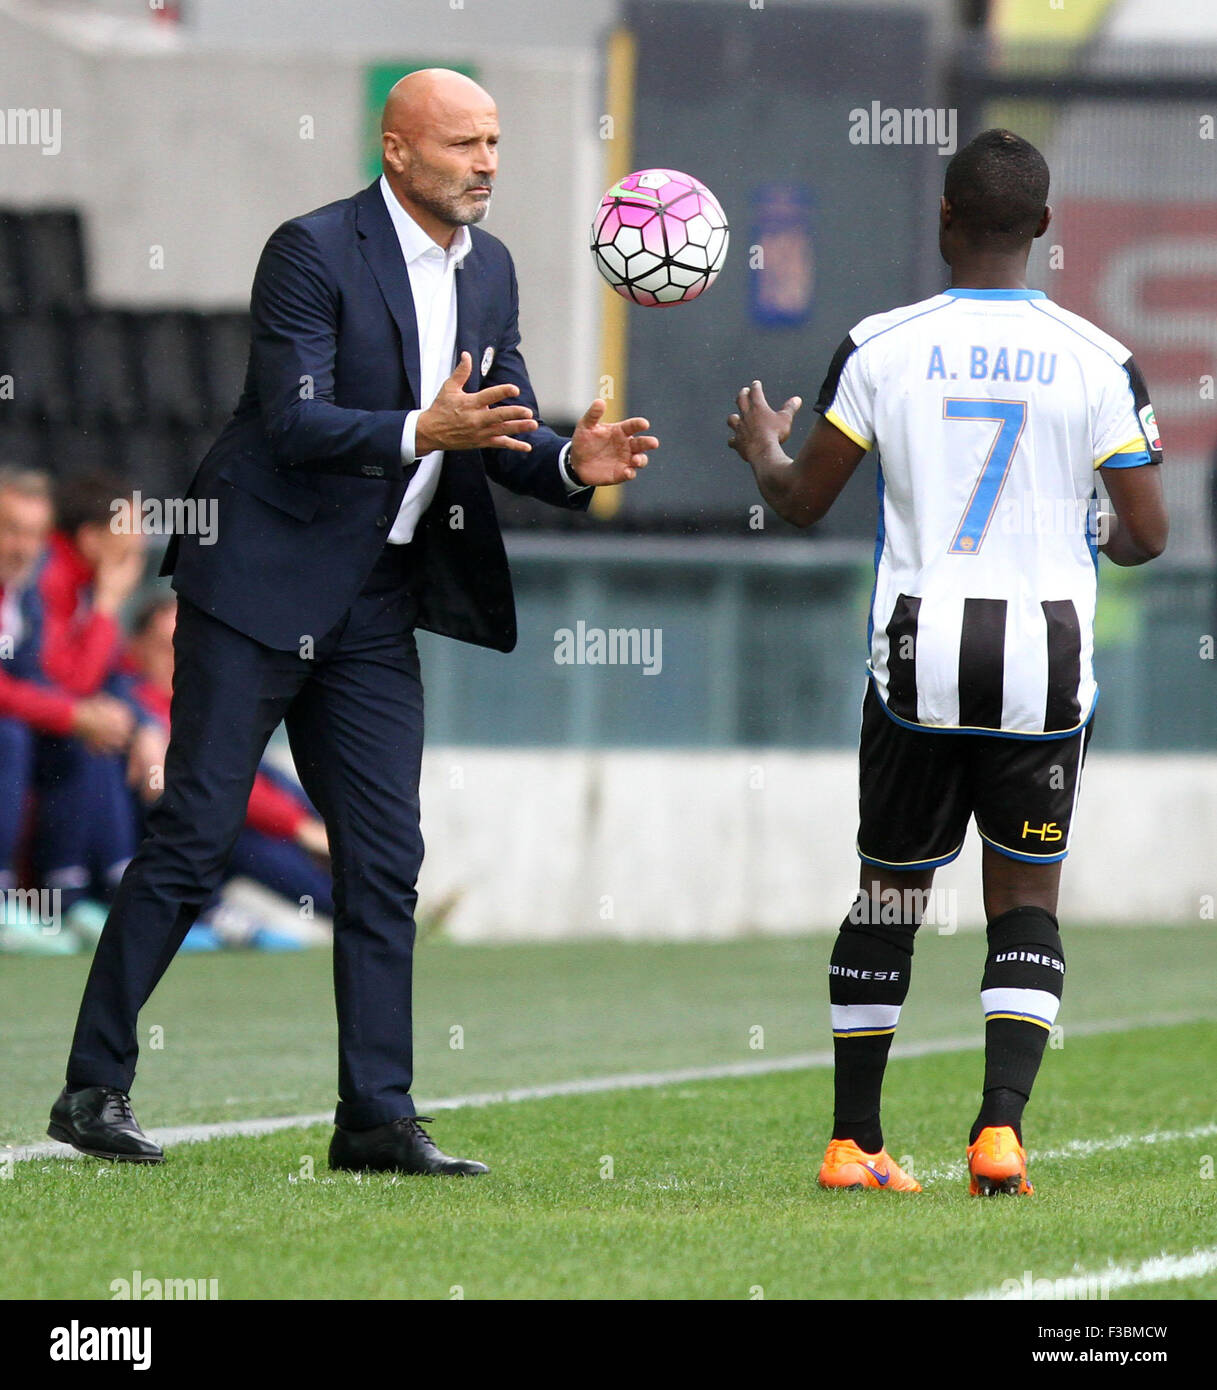 Udine, Italy. 4th October, 2015. Udinese's Coach Stefano Colantuono reacts with Udinese's midfielder Emmanuel Agyemang Badu during the Italian Serie A football match between Udinese Calcio v Genoa Cfc at Friuli Stadium on 4 October, 2015 at Udine. Credit:  Andrea Spinelli/Alamy Live News Stock Photo